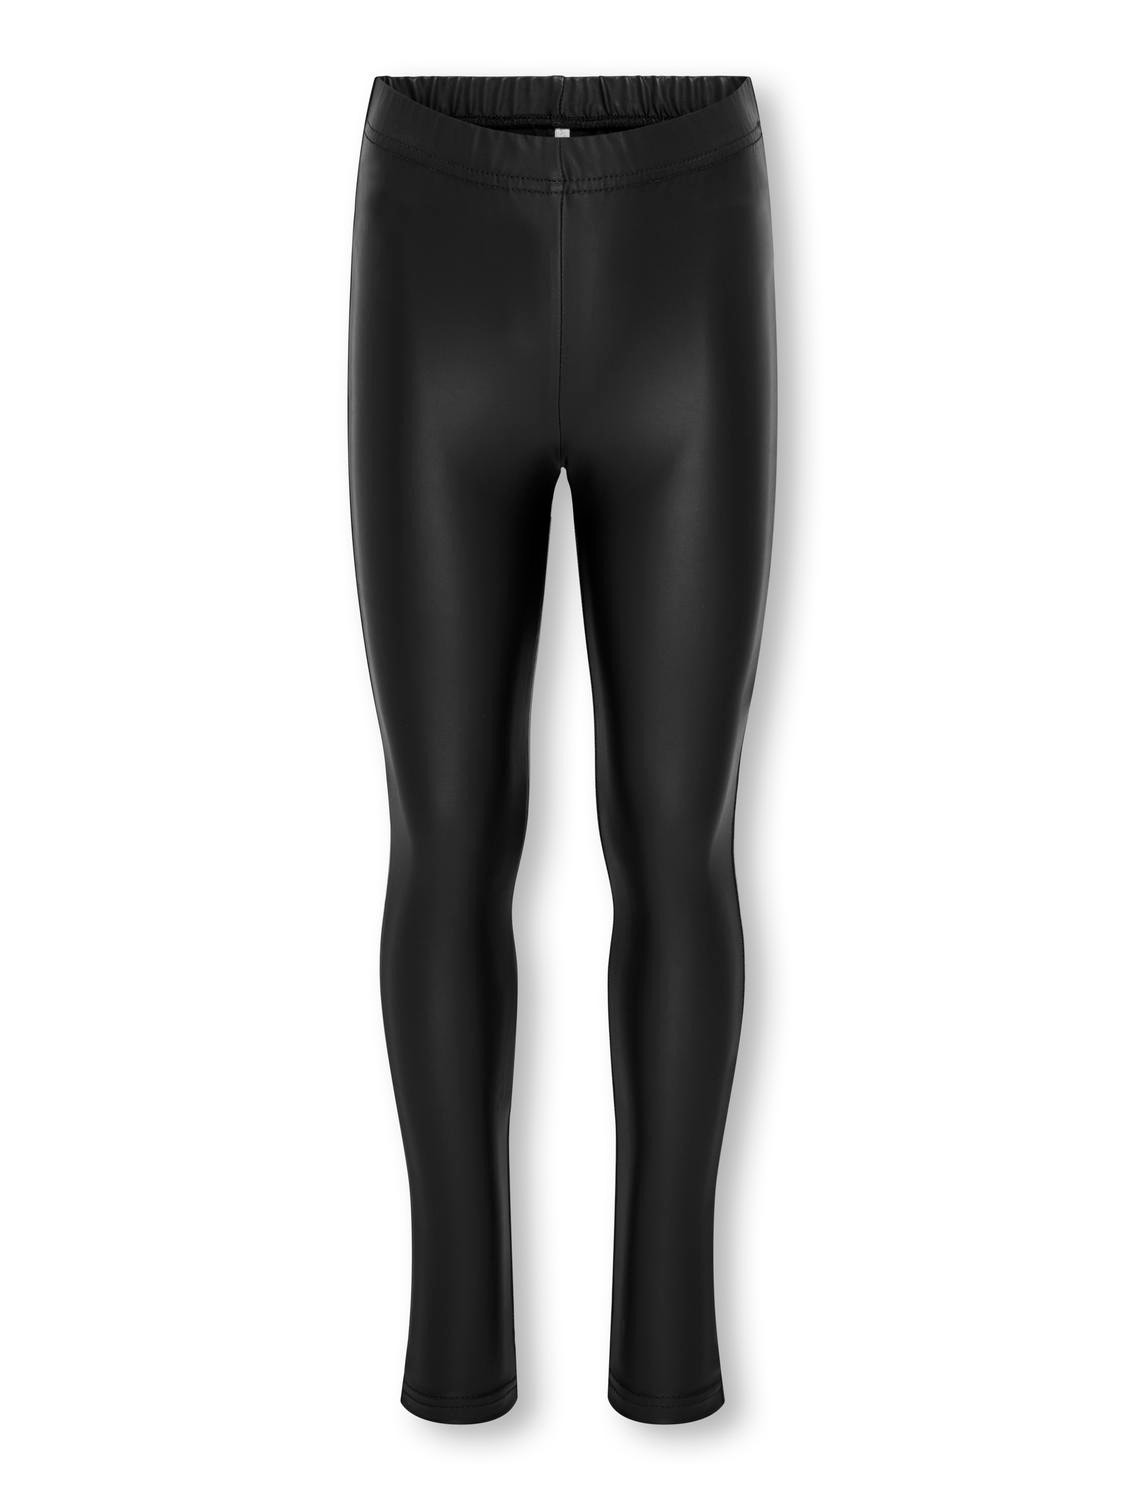 ONLY Tight Fit Mid waist Leggings -Black - 15218508